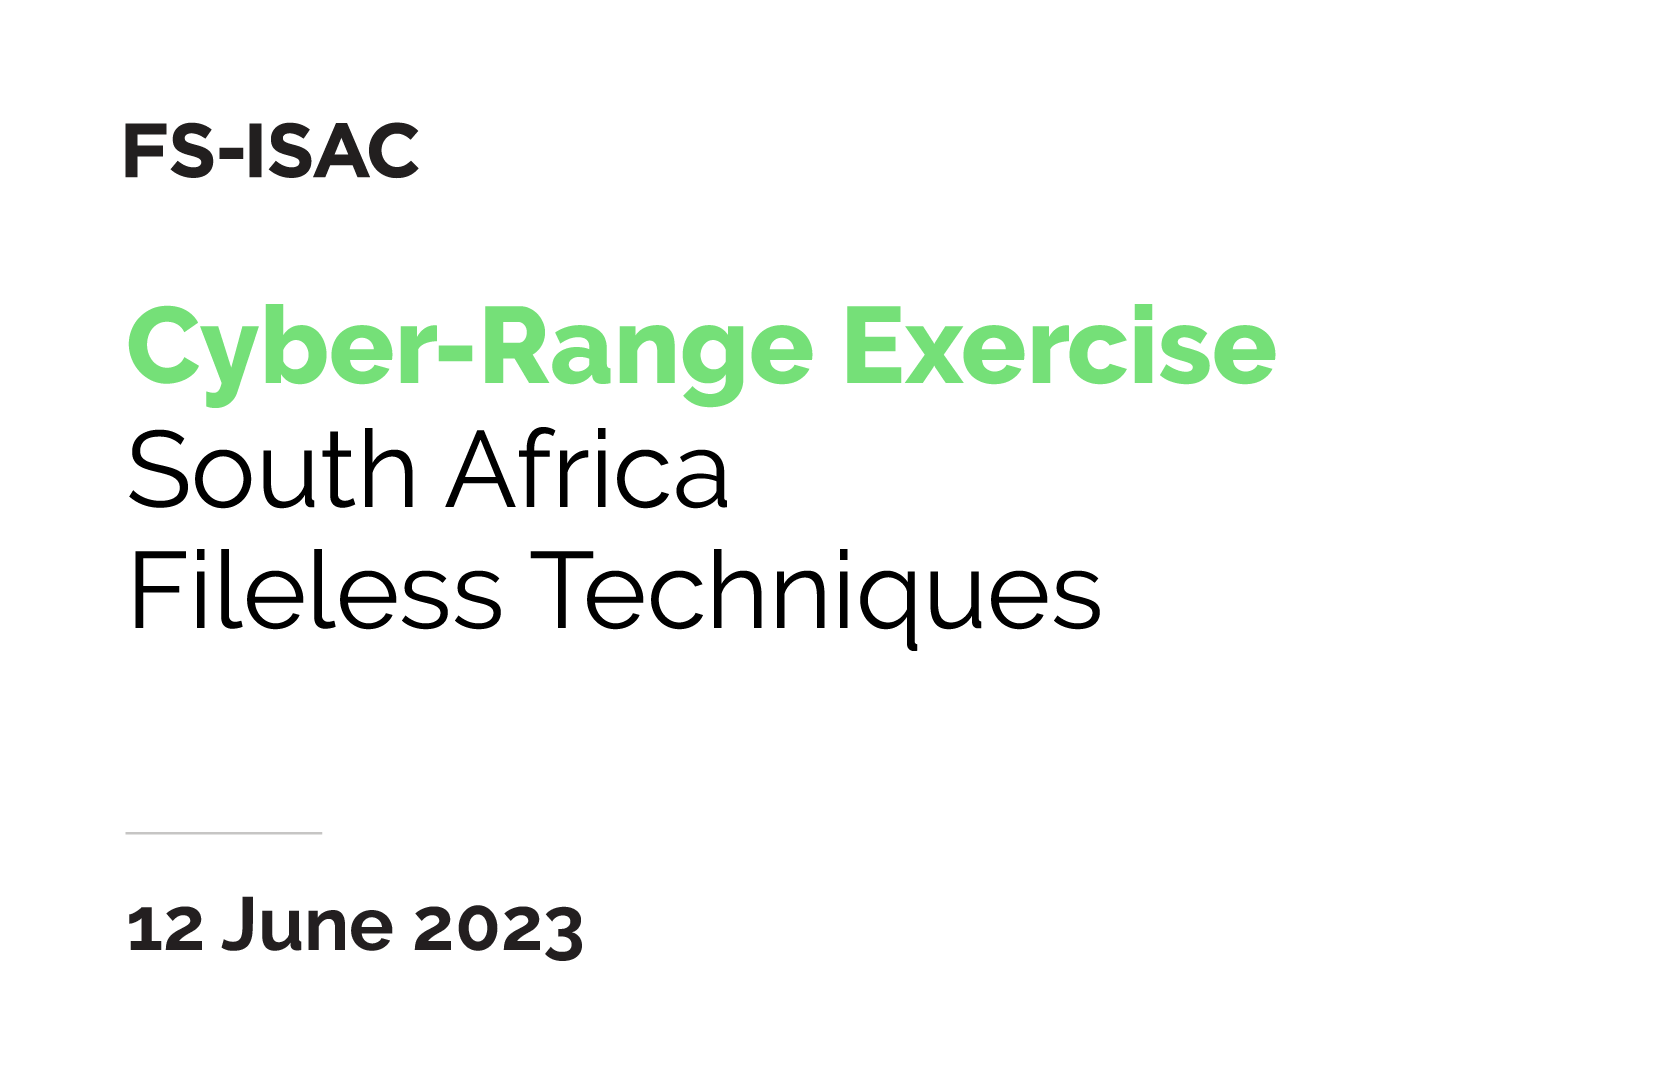 FS-ISAC South Africa Cyber-Range Exercise 23